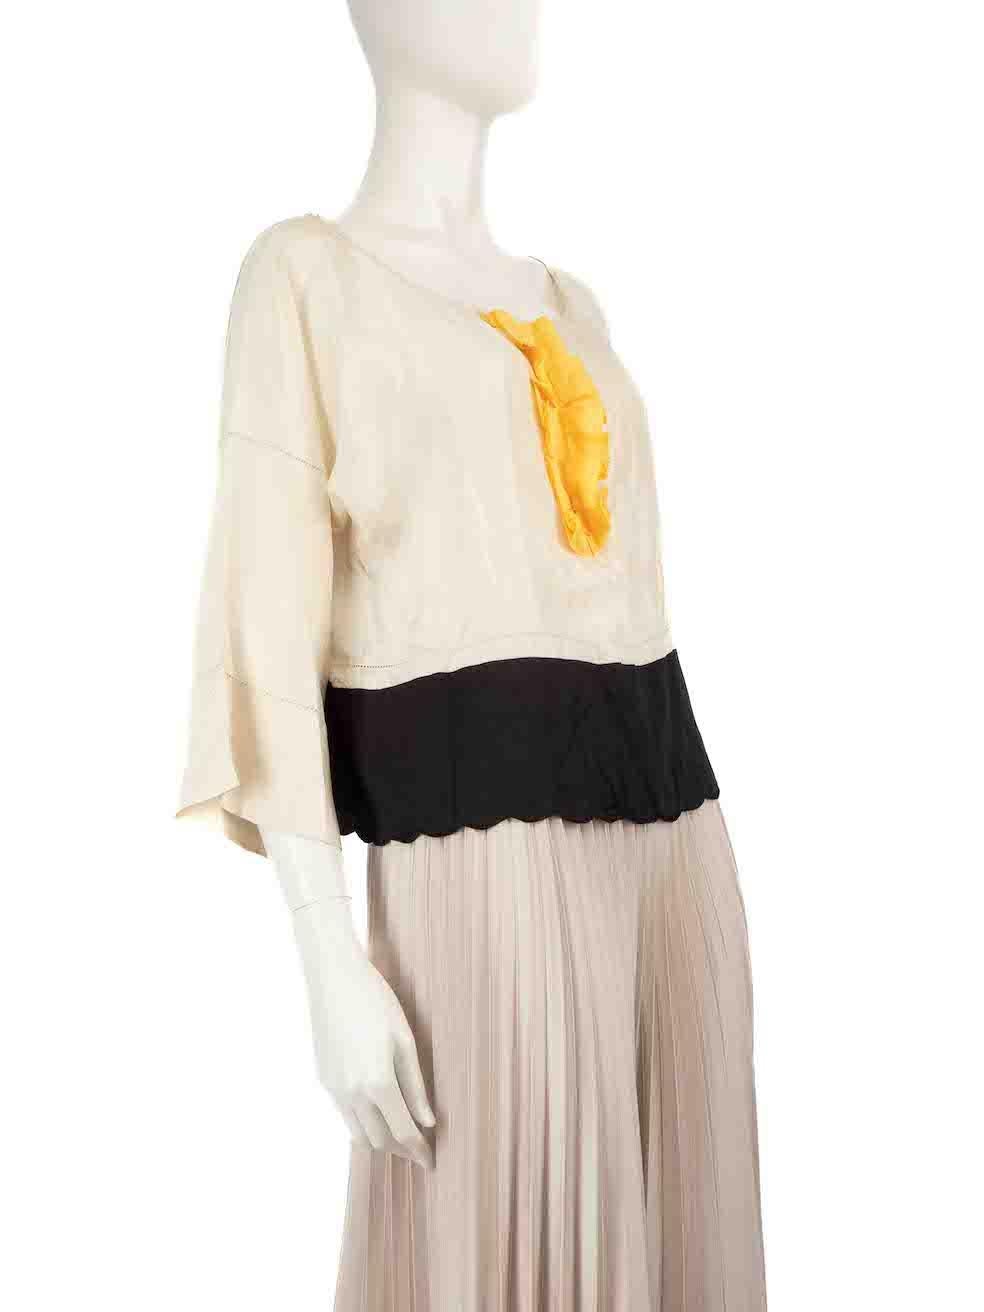 CONDITION is Very good. Minimal wear to the blouse is evident. Minimal wear to the hemline is seen with some pulls to the weave. on this used See by Chloe designer resale item.
 
 
 
 Details
 
 
 Multicolour - Ecru, black and yellow
 
 Silk
 
 Mid